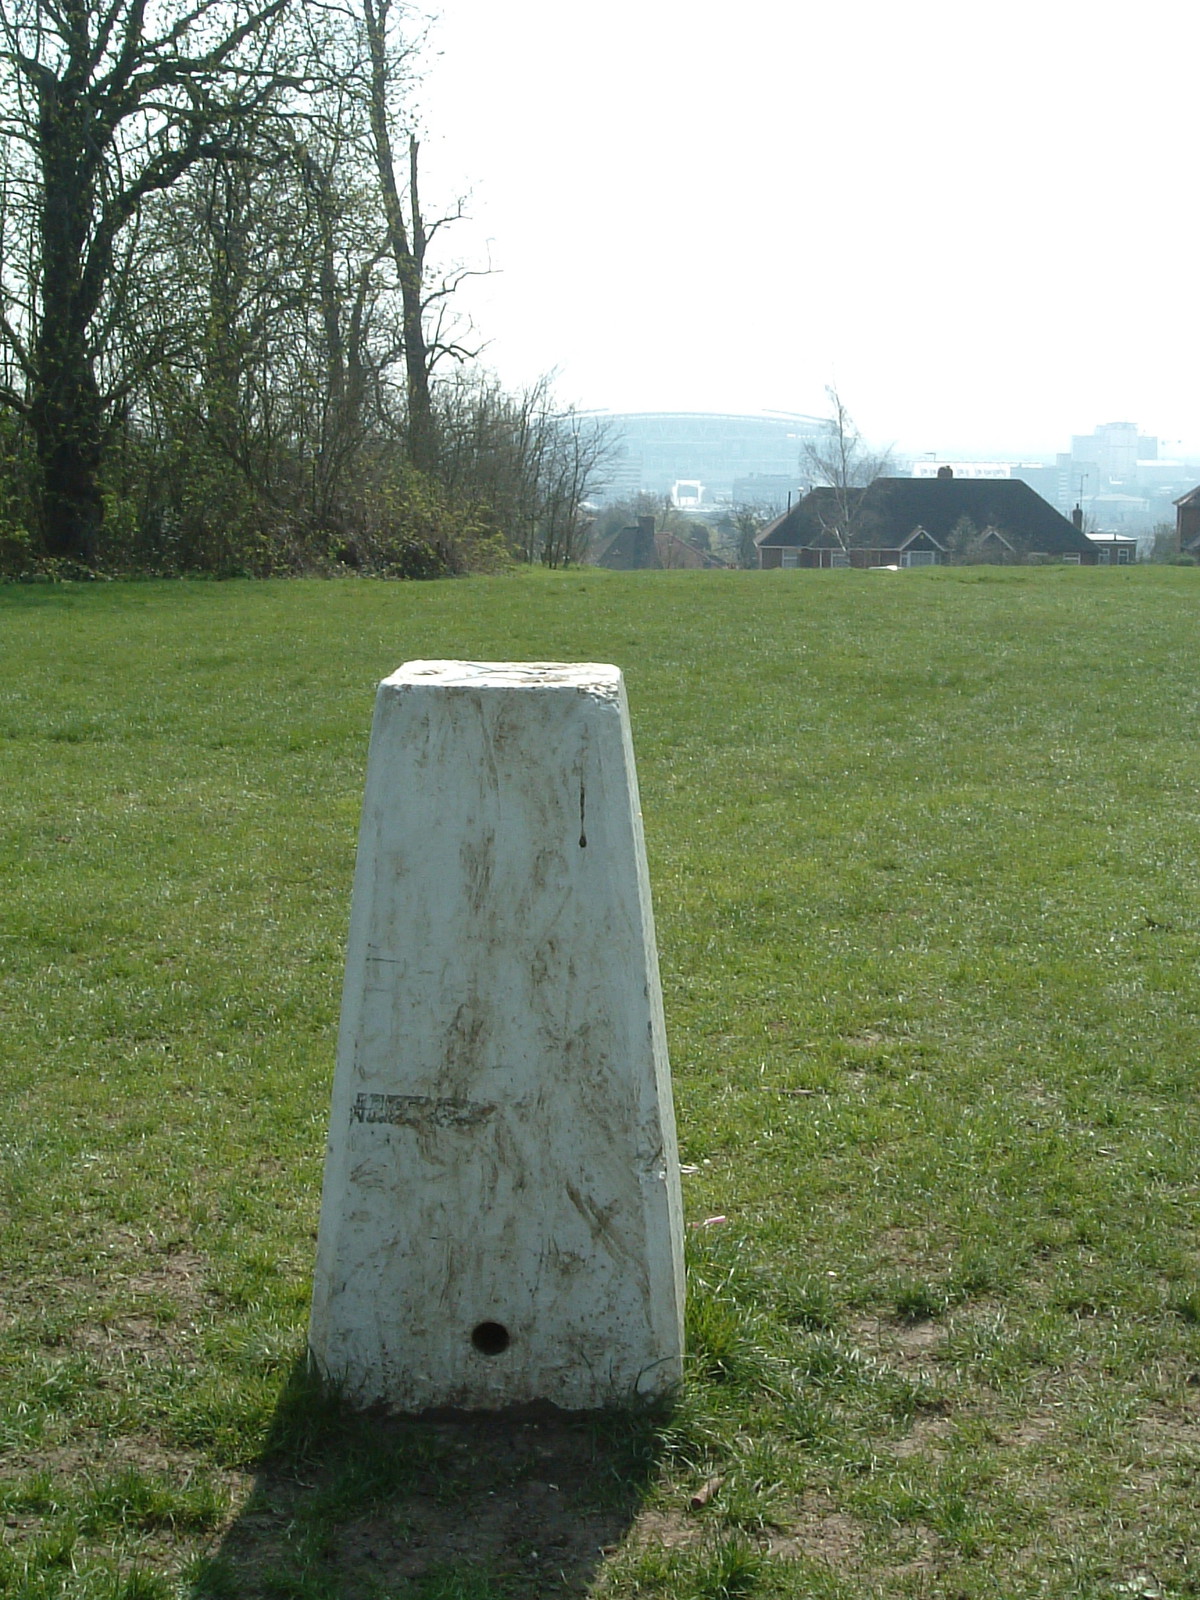 The trig point at the summit of of Barn Hill